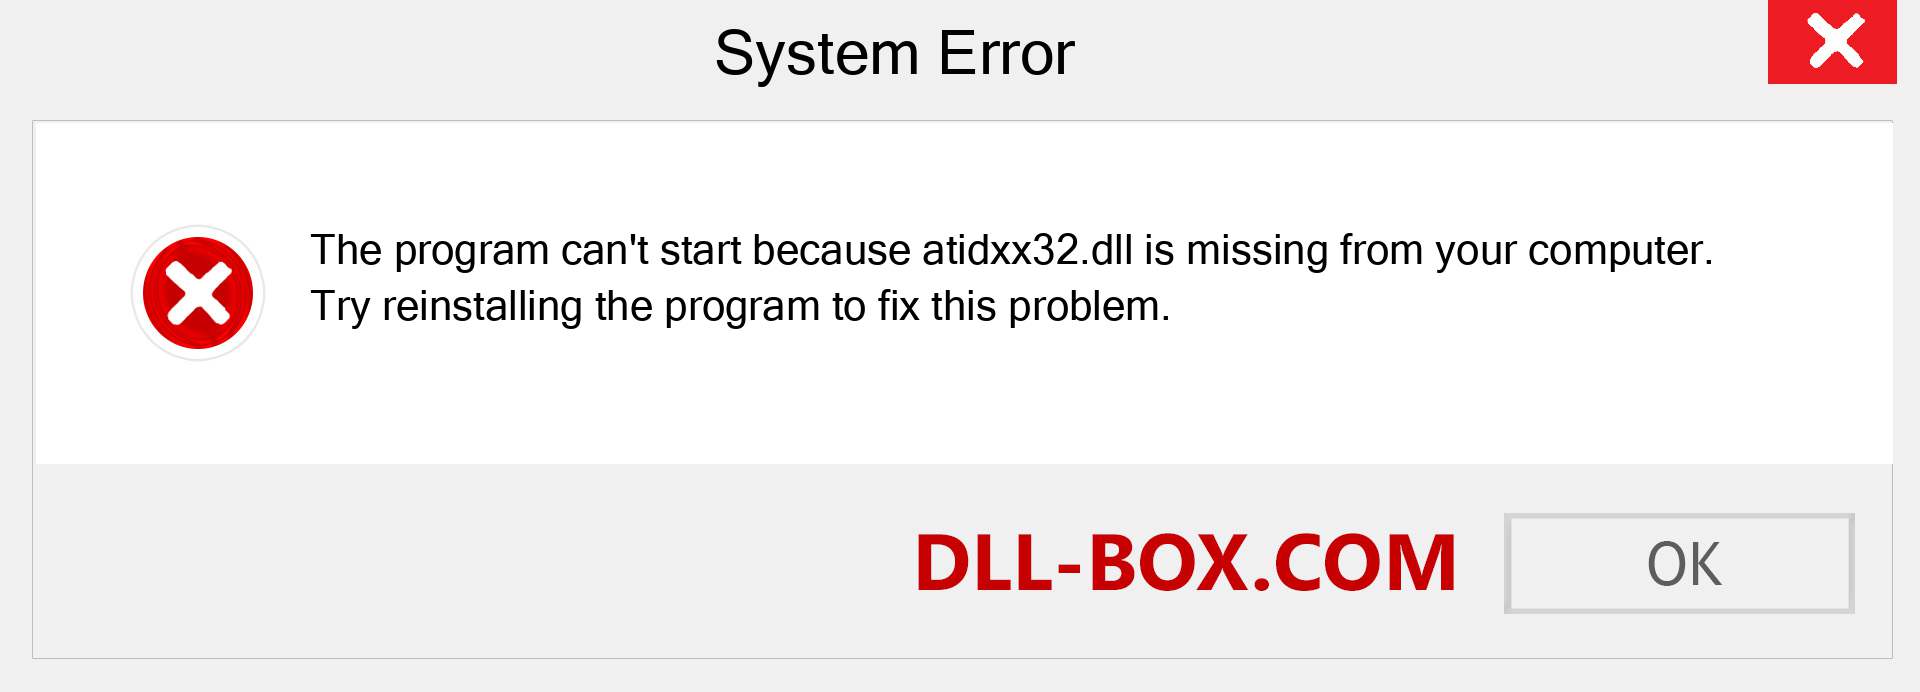  atidxx32.dll file is missing?. Download for Windows 7, 8, 10 - Fix  atidxx32 dll Missing Error on Windows, photos, images